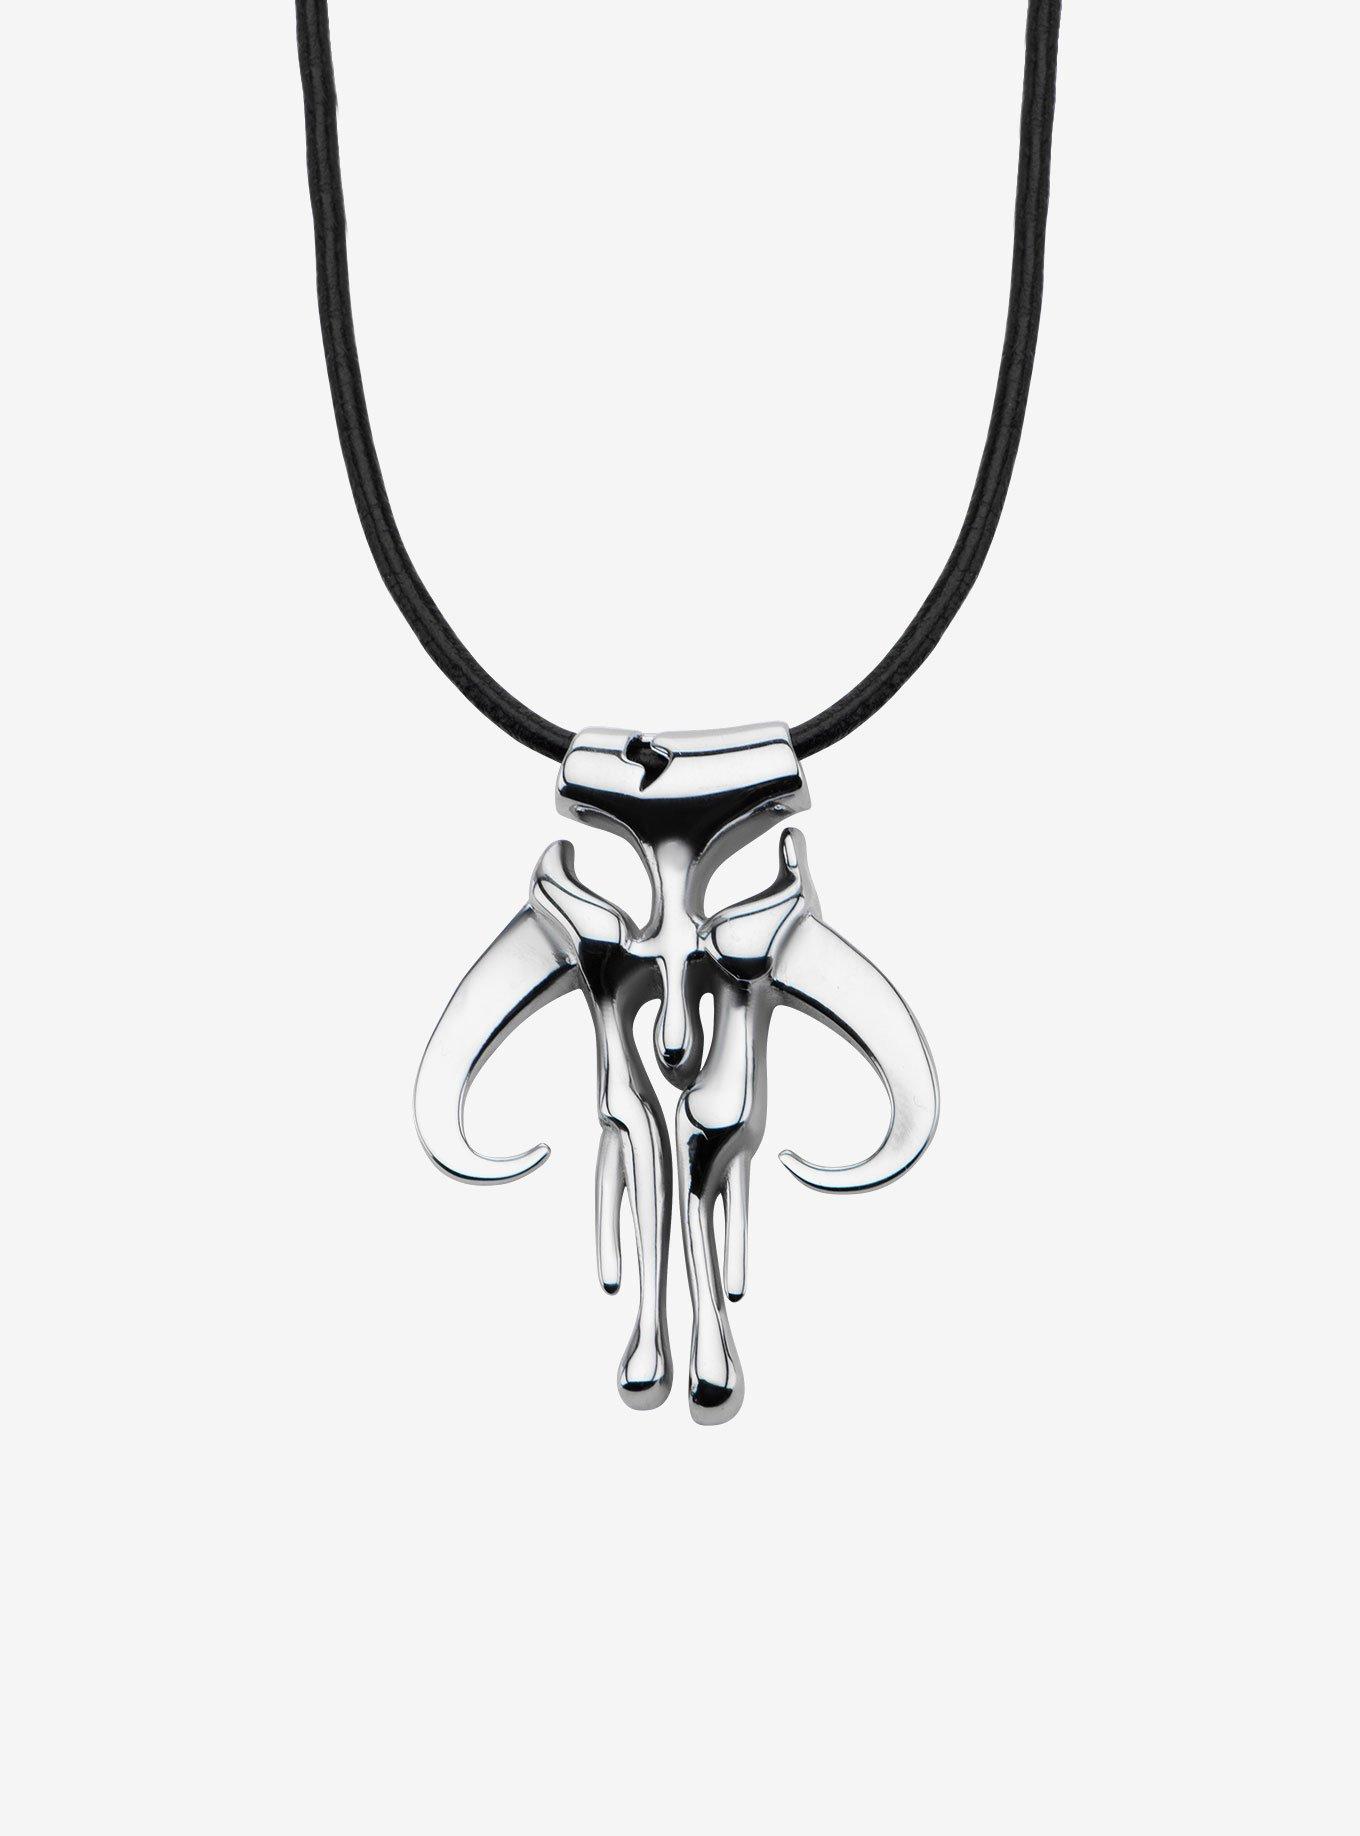 Star Wars Mandalorian Symbol Pendant in Leather Cord Necklace, , hi-res